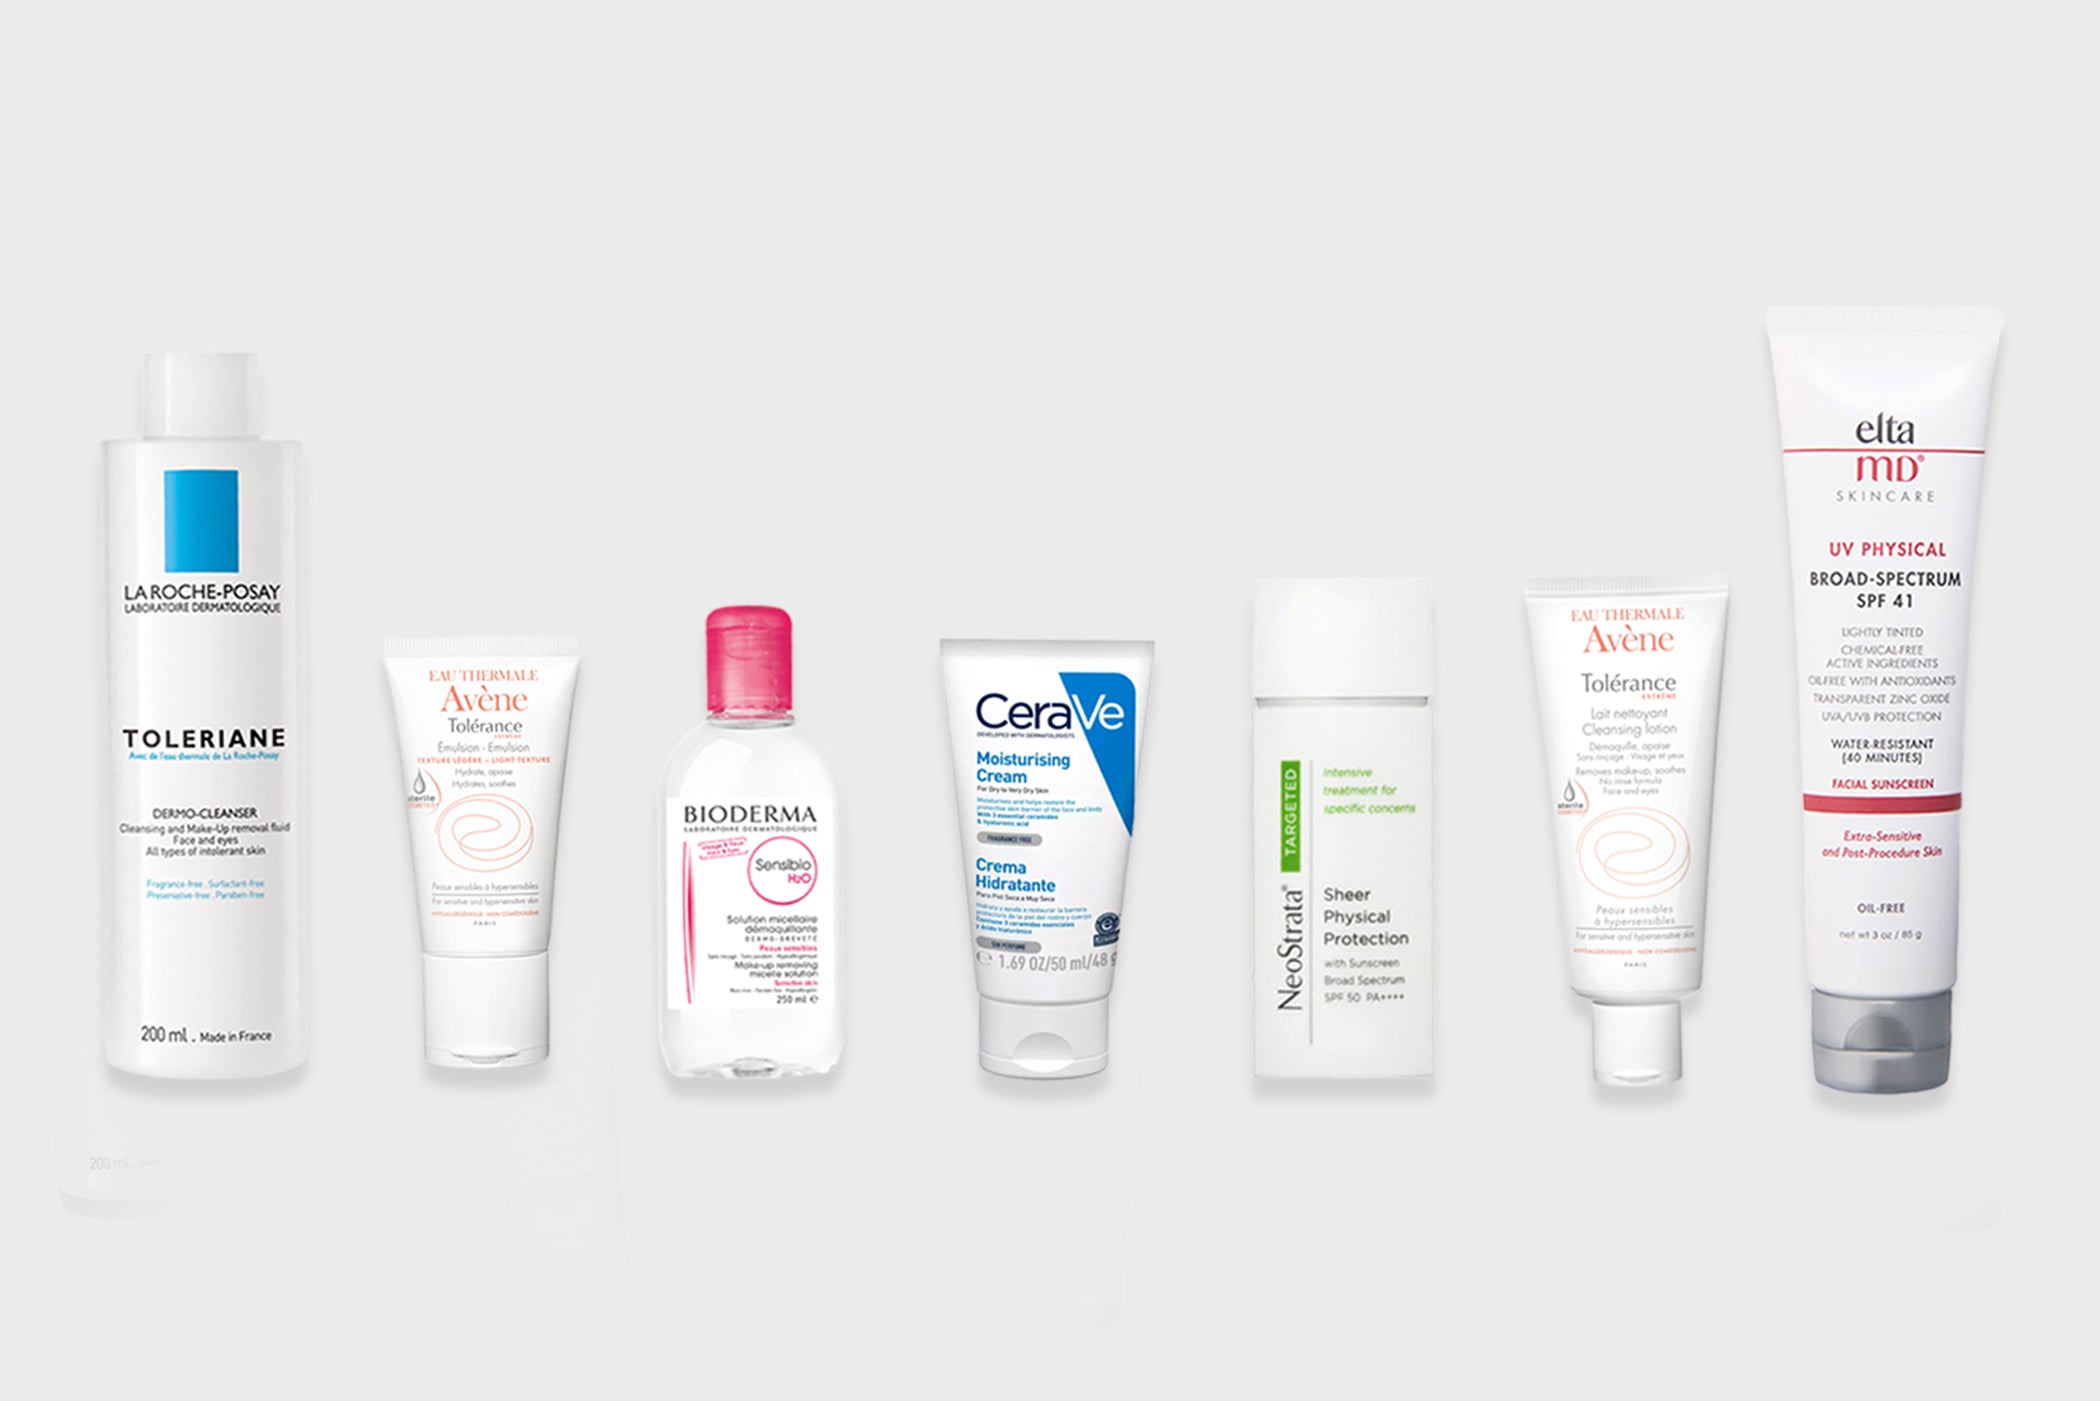 How To Rebuild Your Skin Barrier: The Products I Recommend